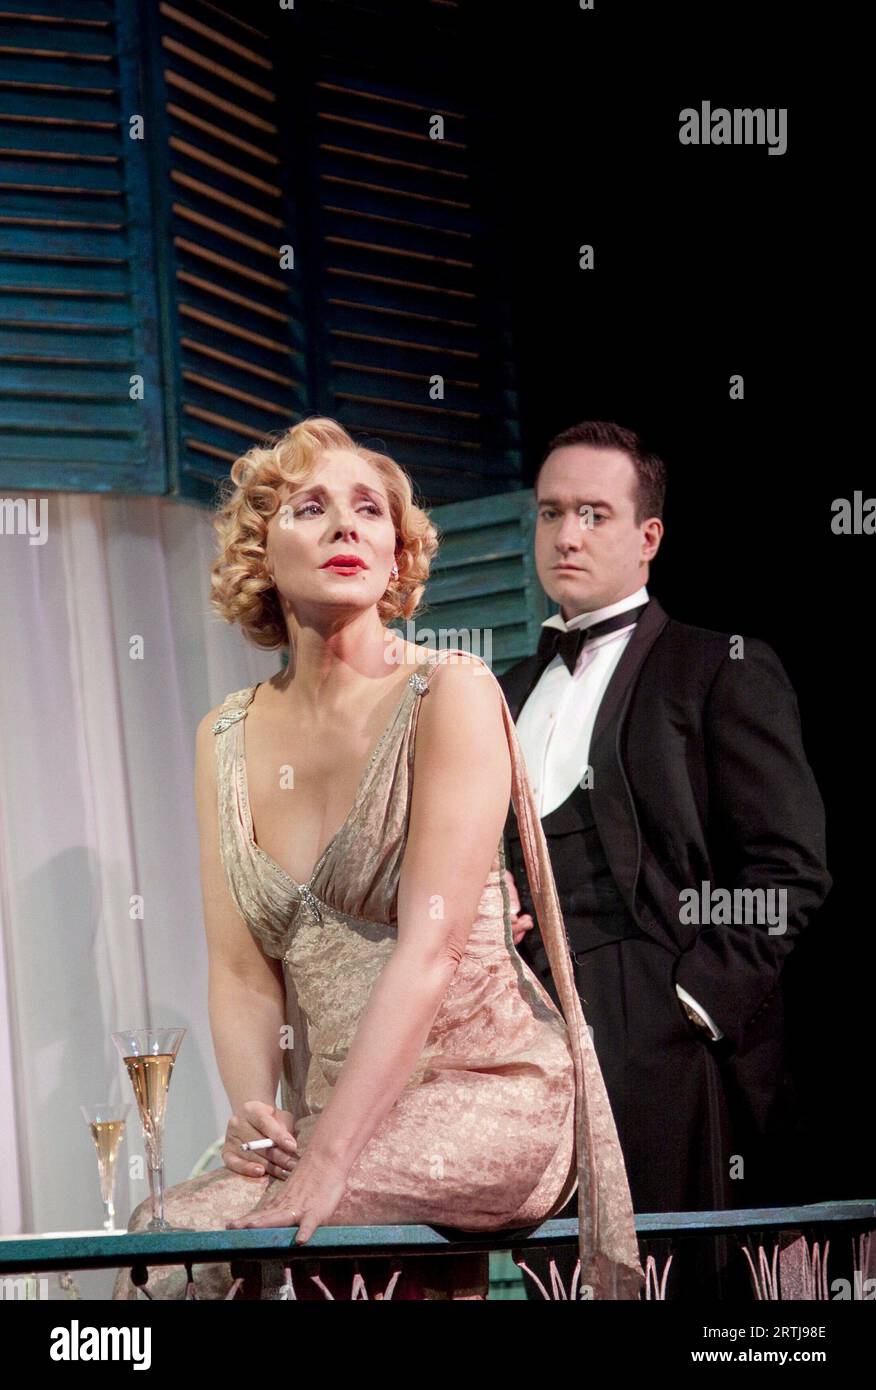 Kim Cattrall (Amanda Prynne), Matthew Macfadyen (Elyot Chase) in PRIVATE LIVES by Noel Coward at the Vaudeville Theatre, London WC2  03/03/2010 design: Rob Howell  lighting: David Howe  director: Richard Eyre Stock Photo